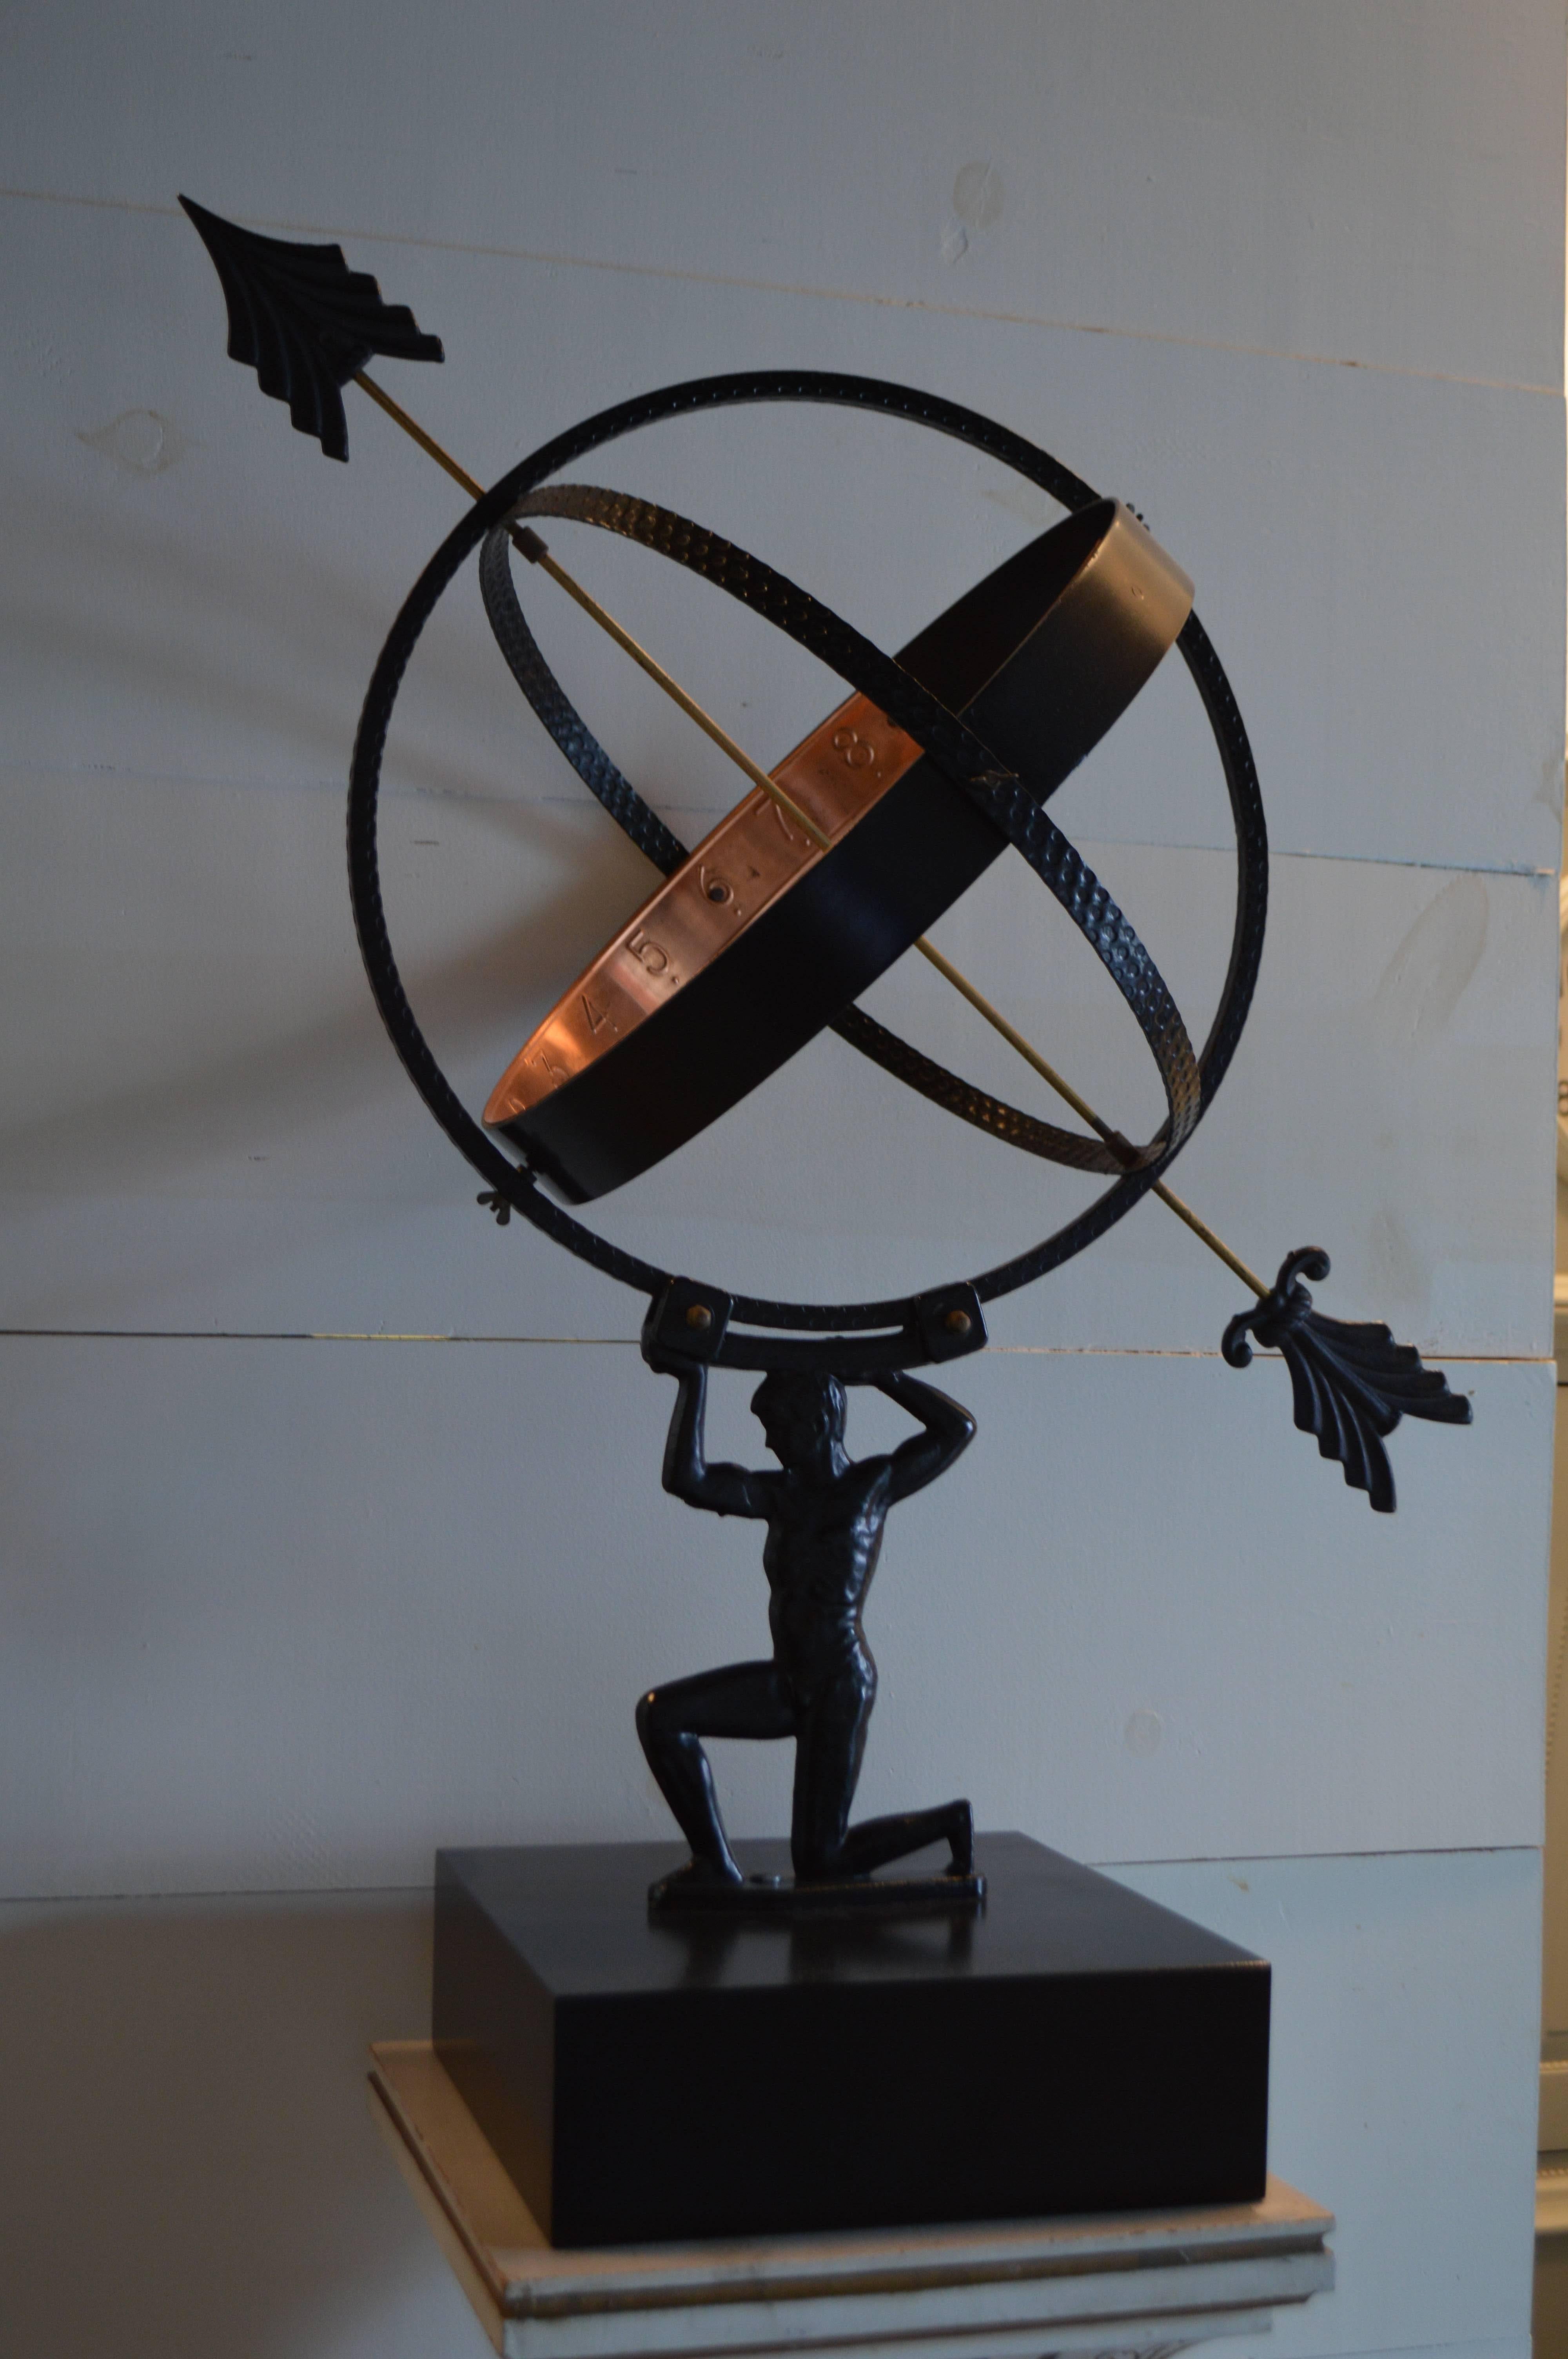 This figural armillary of Atlas, constructed of metal with a copper numeric banding, hails from Sweden. Original matte black finish and mounted on a well-proportioned custom wooden pedestal also painted in black lacquer. It is missing one strip of